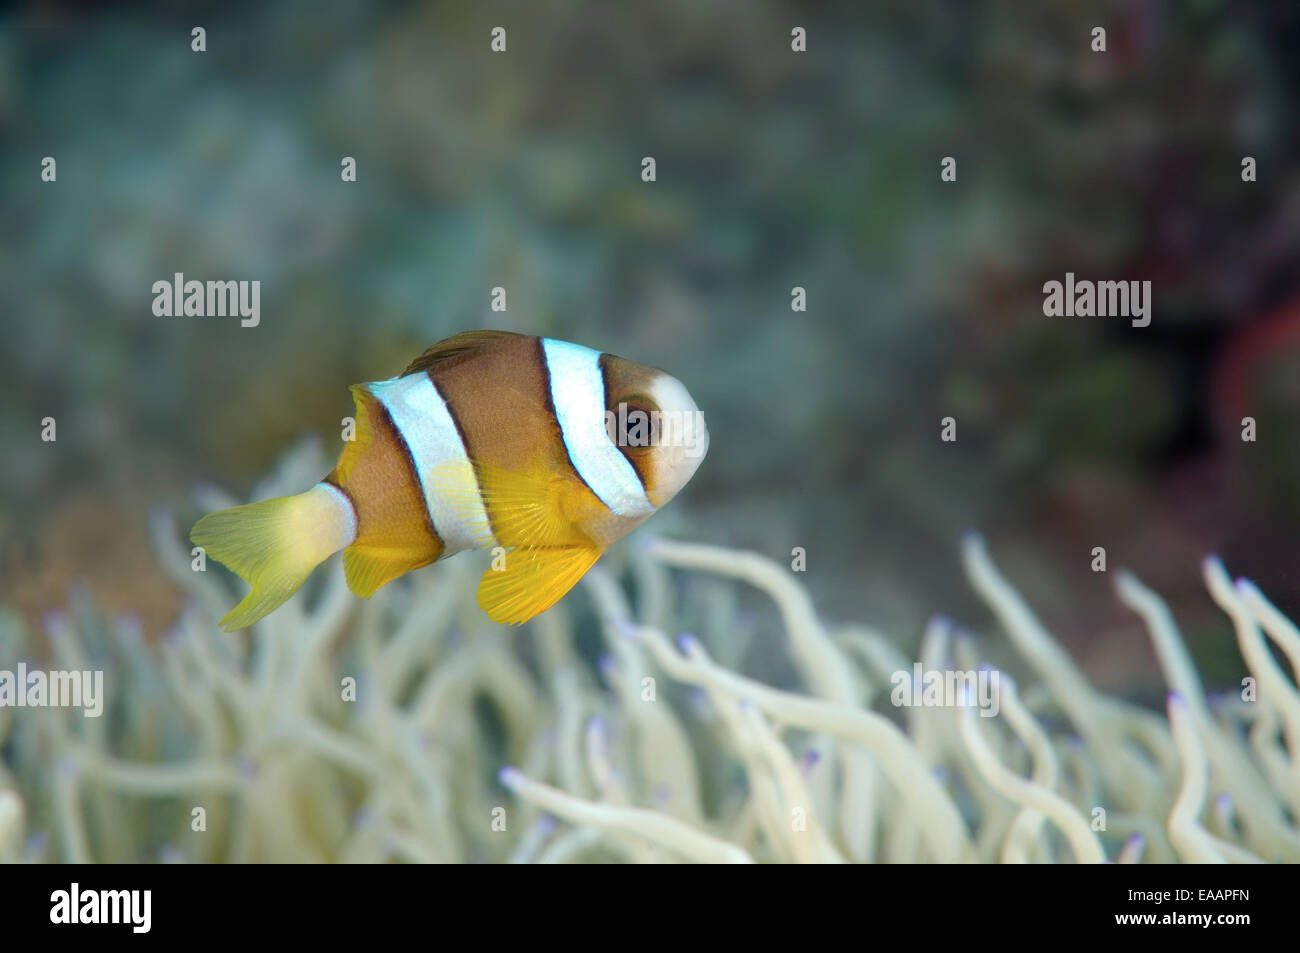 Clark's anemonefish or yellowtail clownfish (Amphiprion clarkii) Bohol Sea, Philippines, Stock Photo